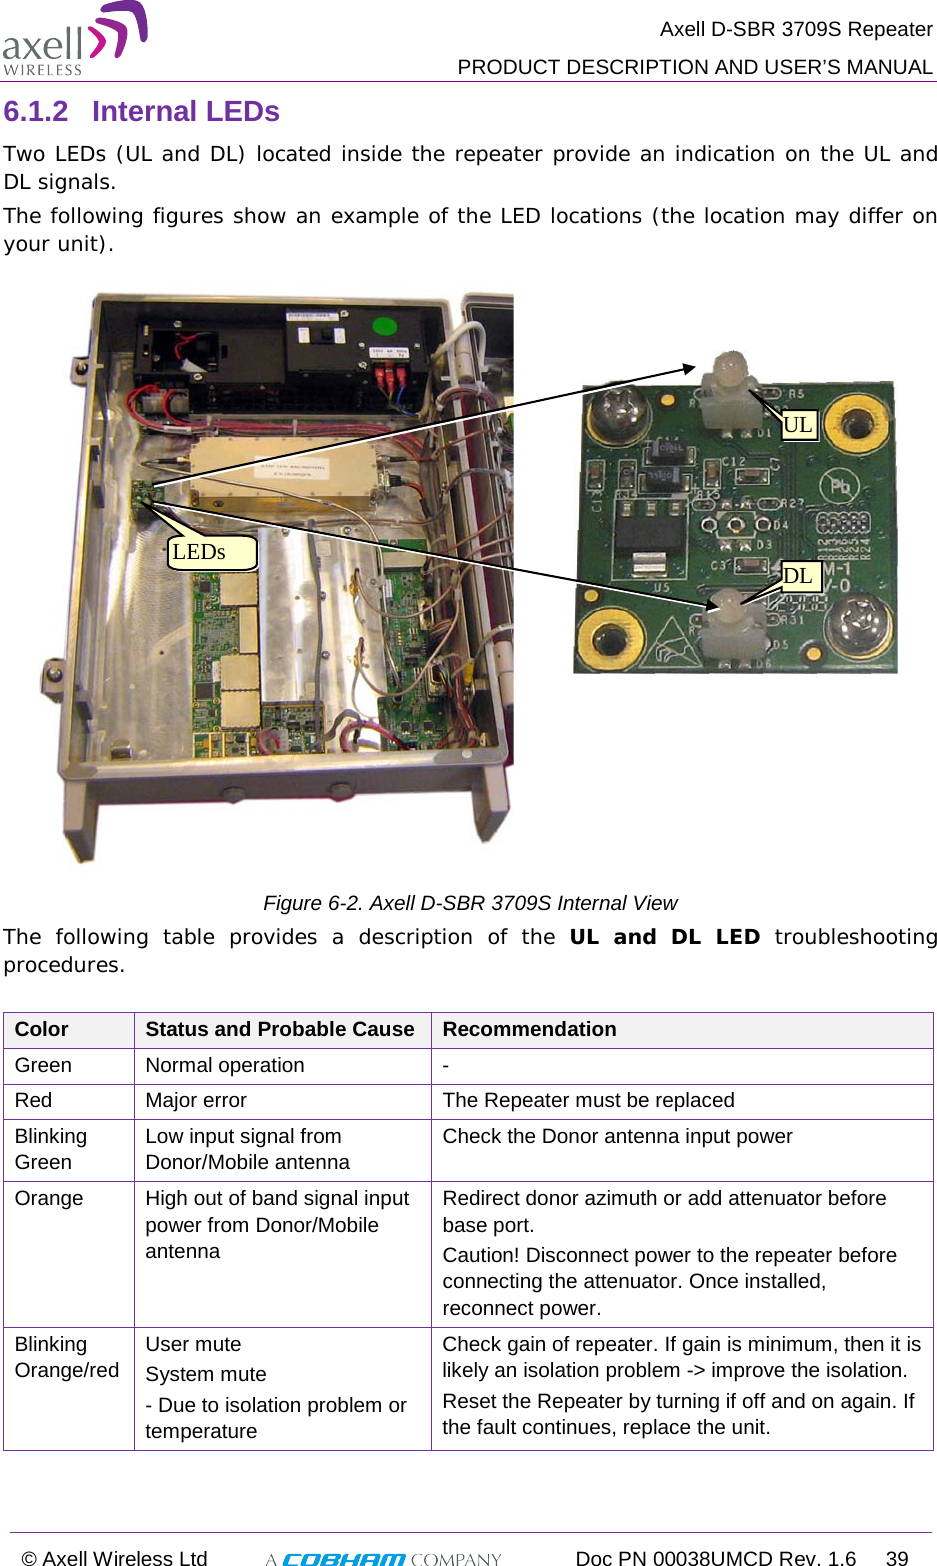  Axell D-SBR 3709S Repeater  PRODUCT DESCRIPTION AND USER’S MANUAL  © Axell Wireless Ltd  Doc PN 00038UMCD Rev. 1.6 39  6.1.2  Internal LEDs Two LEDs (UL and DL) located inside the repeater provide an indication on the UL and DL signals. The following figures show an example of the LED locations (the location may differ on your unit).   Figure  6-2. Axell D-SBR 3709S Internal View The following table provides a description of the UL and DL LED troubleshooting procedures.  Color Status and Probable Cause Recommendation Green Normal operation  - Red Major error The Repeater must be replaced Blinking Green Low input signal from Donor/Mobile antenna Check the Donor antenna input power Orange High out of band signal input power from Donor/Mobile antenna  Redirect donor azimuth or add attenuator before base port. Caution! Disconnect power to the repeater before connecting the attenuator. Once installed, reconnect power. Blinking Orange/red User mute System mute - Due to isolation problem or temperature   Check gain of repeater. If gain is minimum, then it is likely an isolation problem -&gt; improve the isolation. Reset the Repeater by turning if off and on again. If the fault continues, replace the unit.  DL UL LEDs 